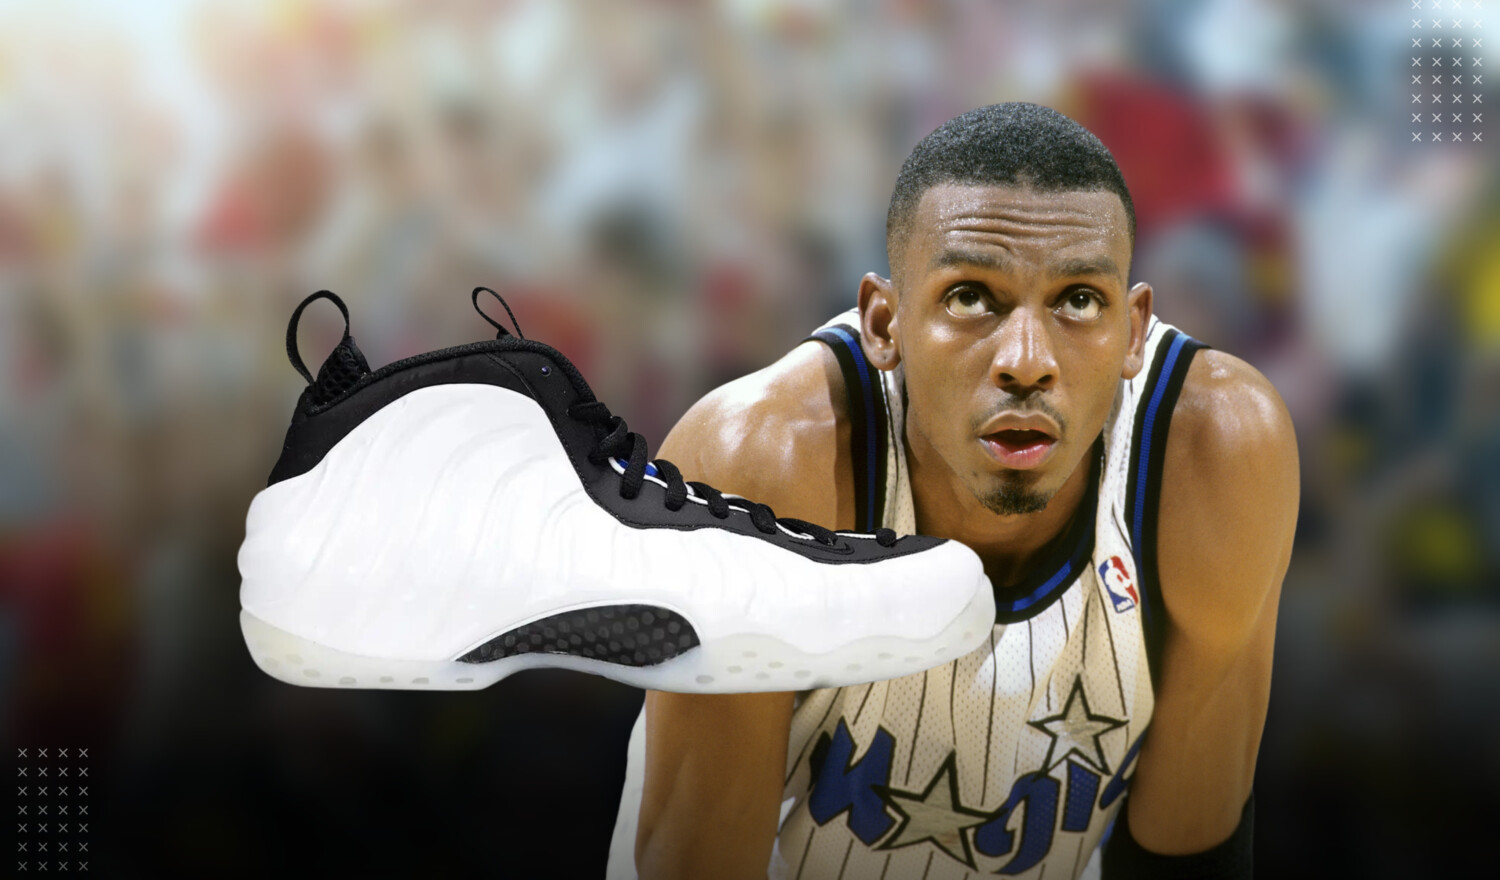 Penny Hardaway & the Legend of the 'Home' Air Foamposite One